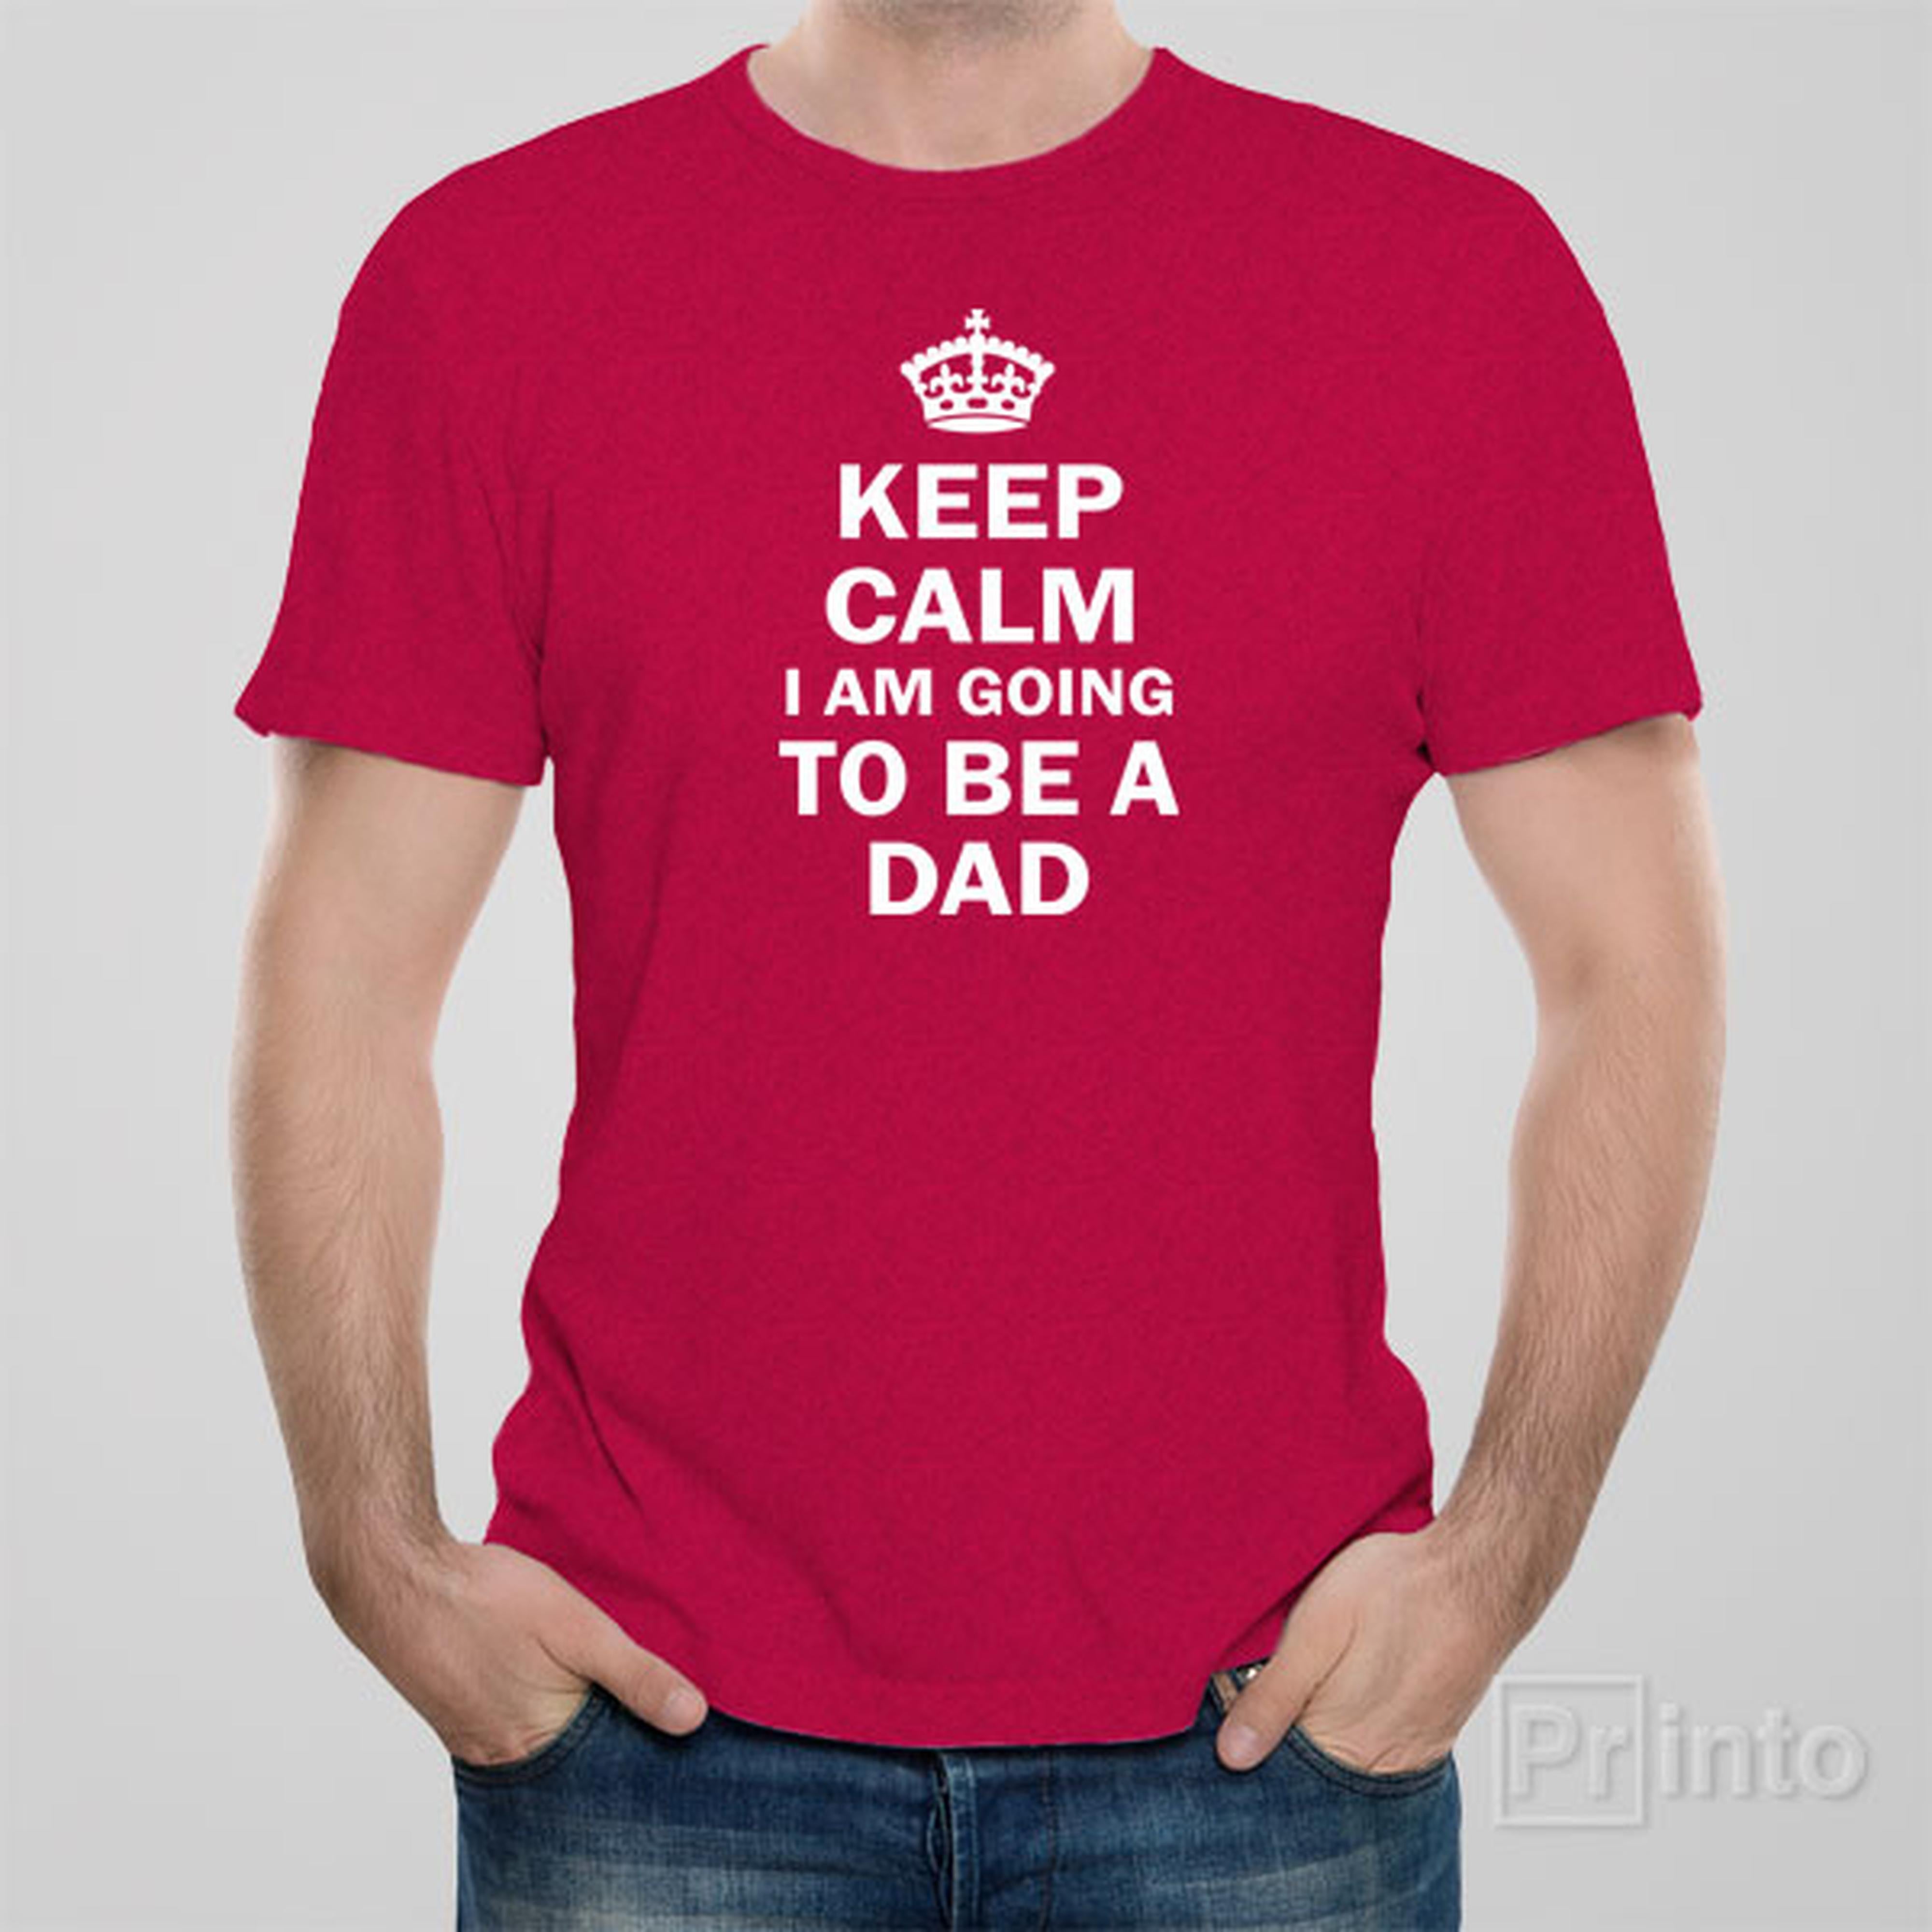 keep-calm-i-am-going-to-be-a-dad